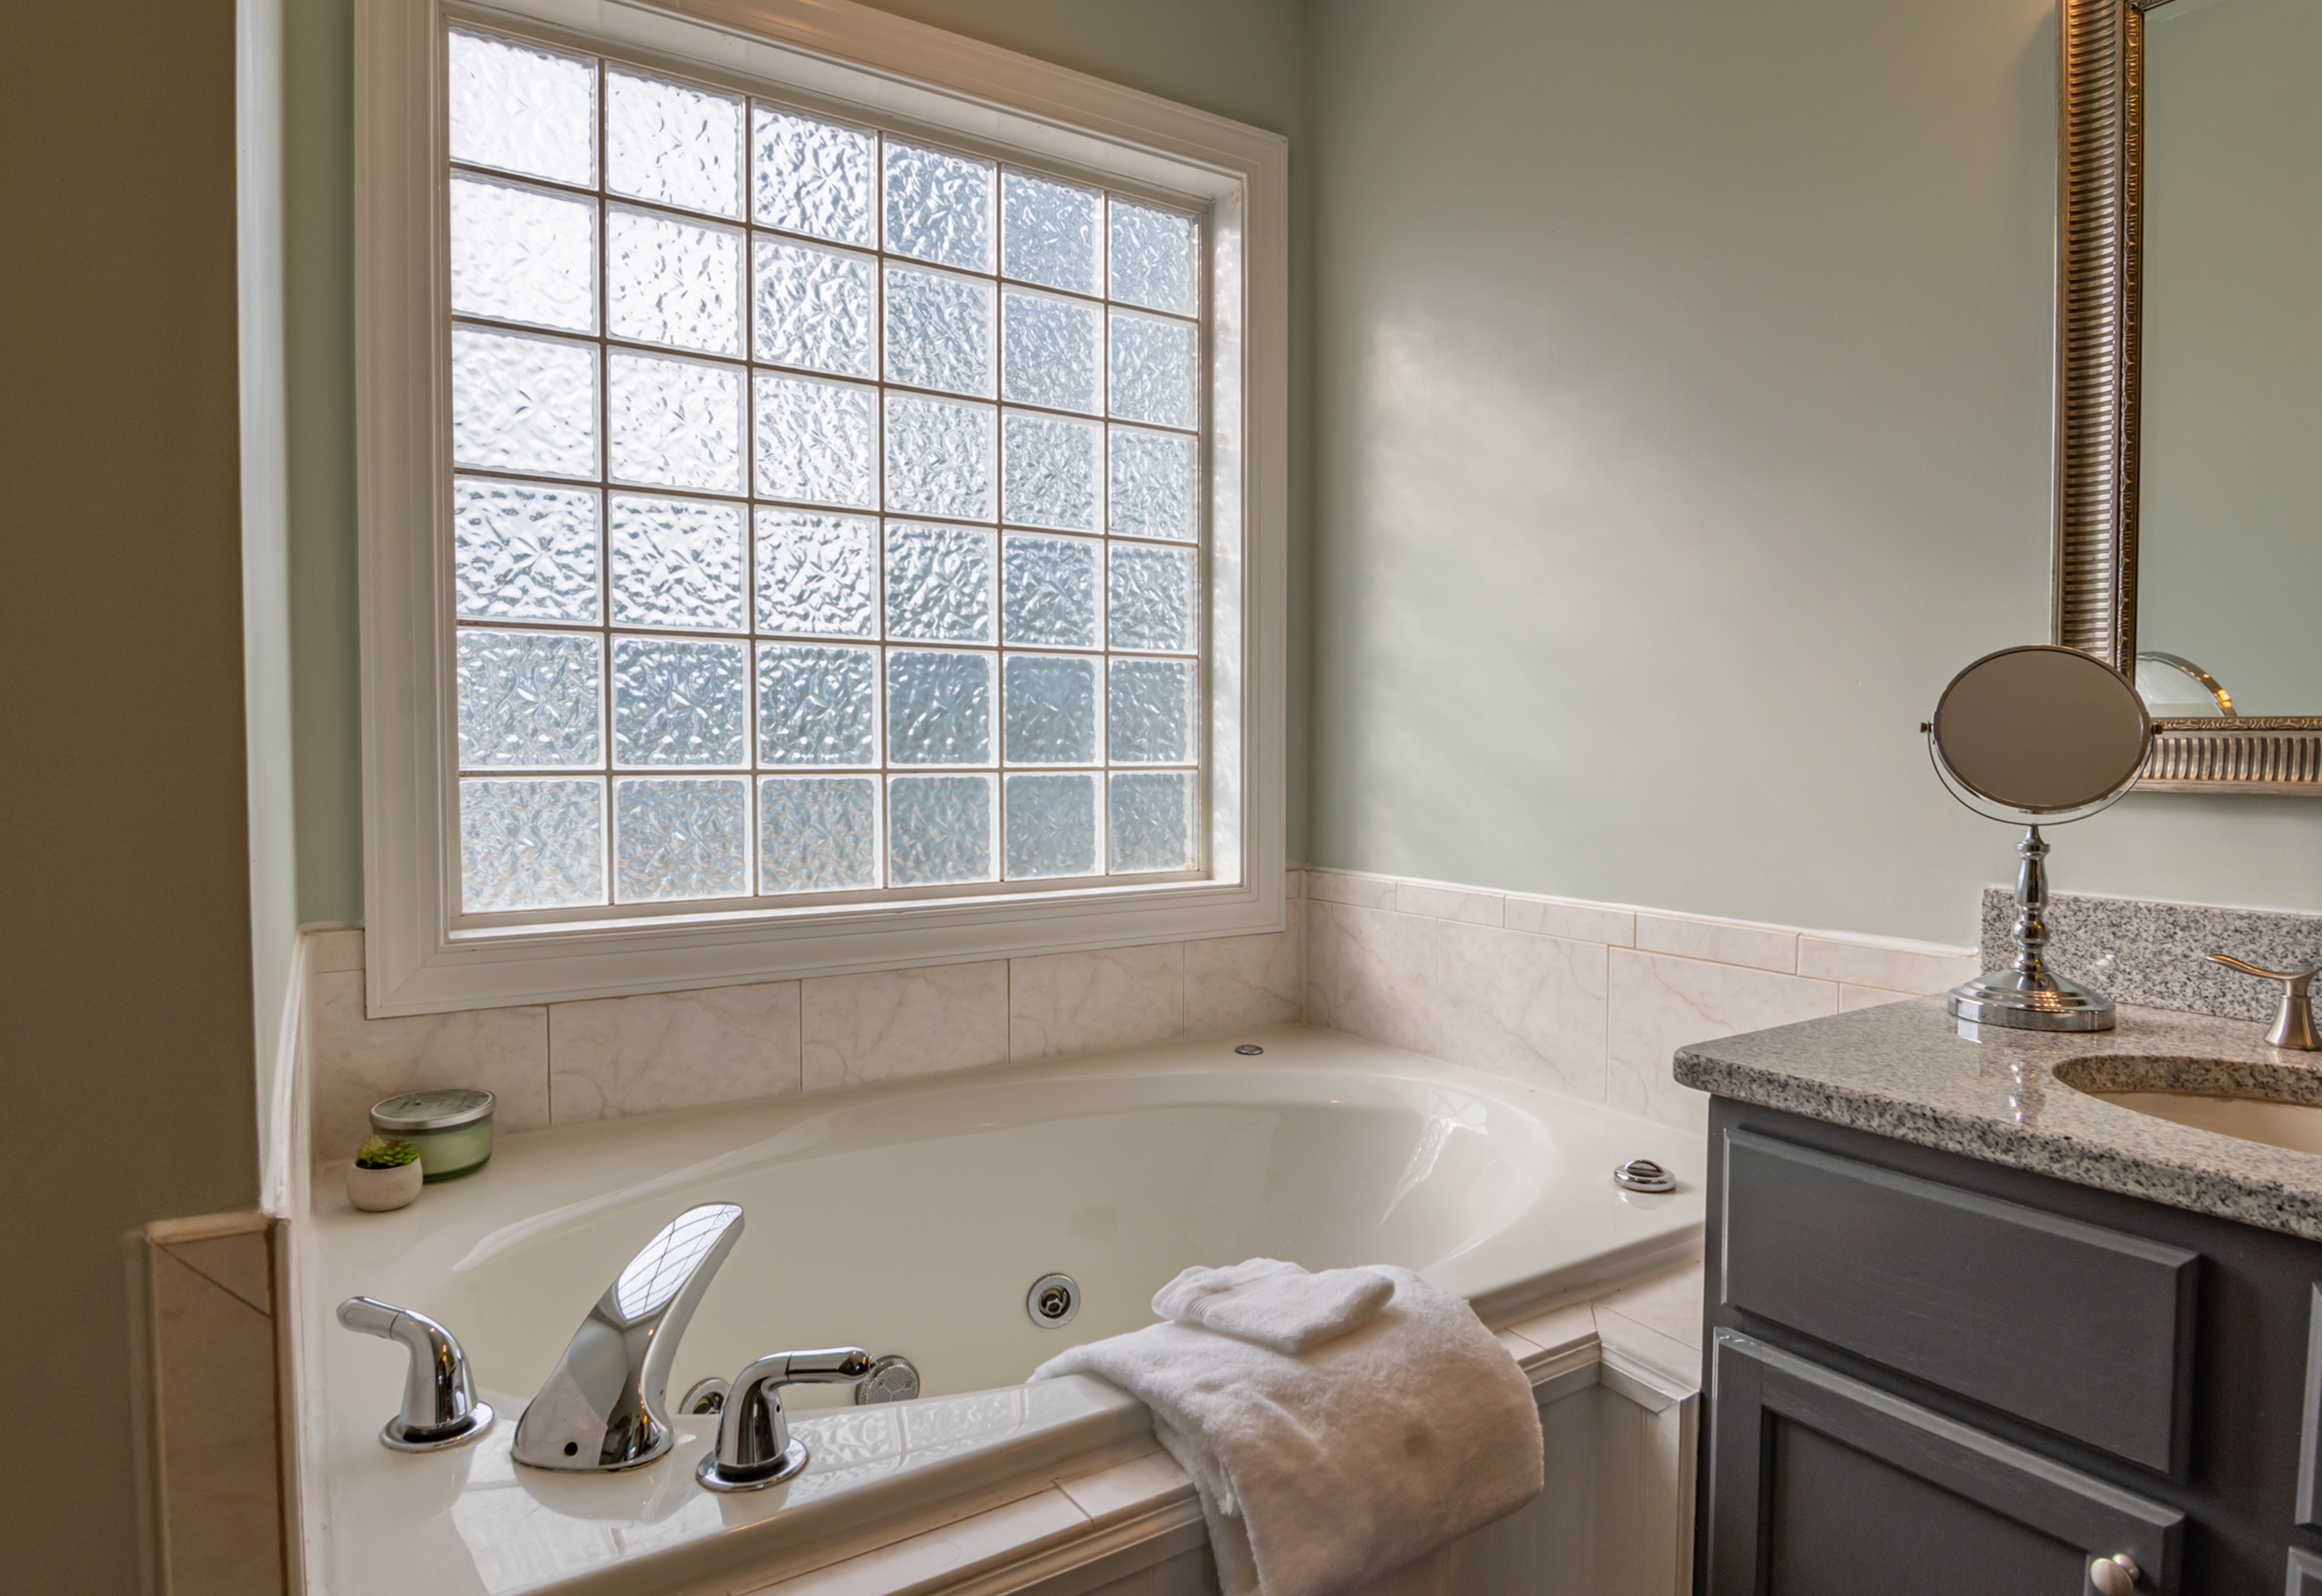 How to Update Your Bathroom on a Tight Budget